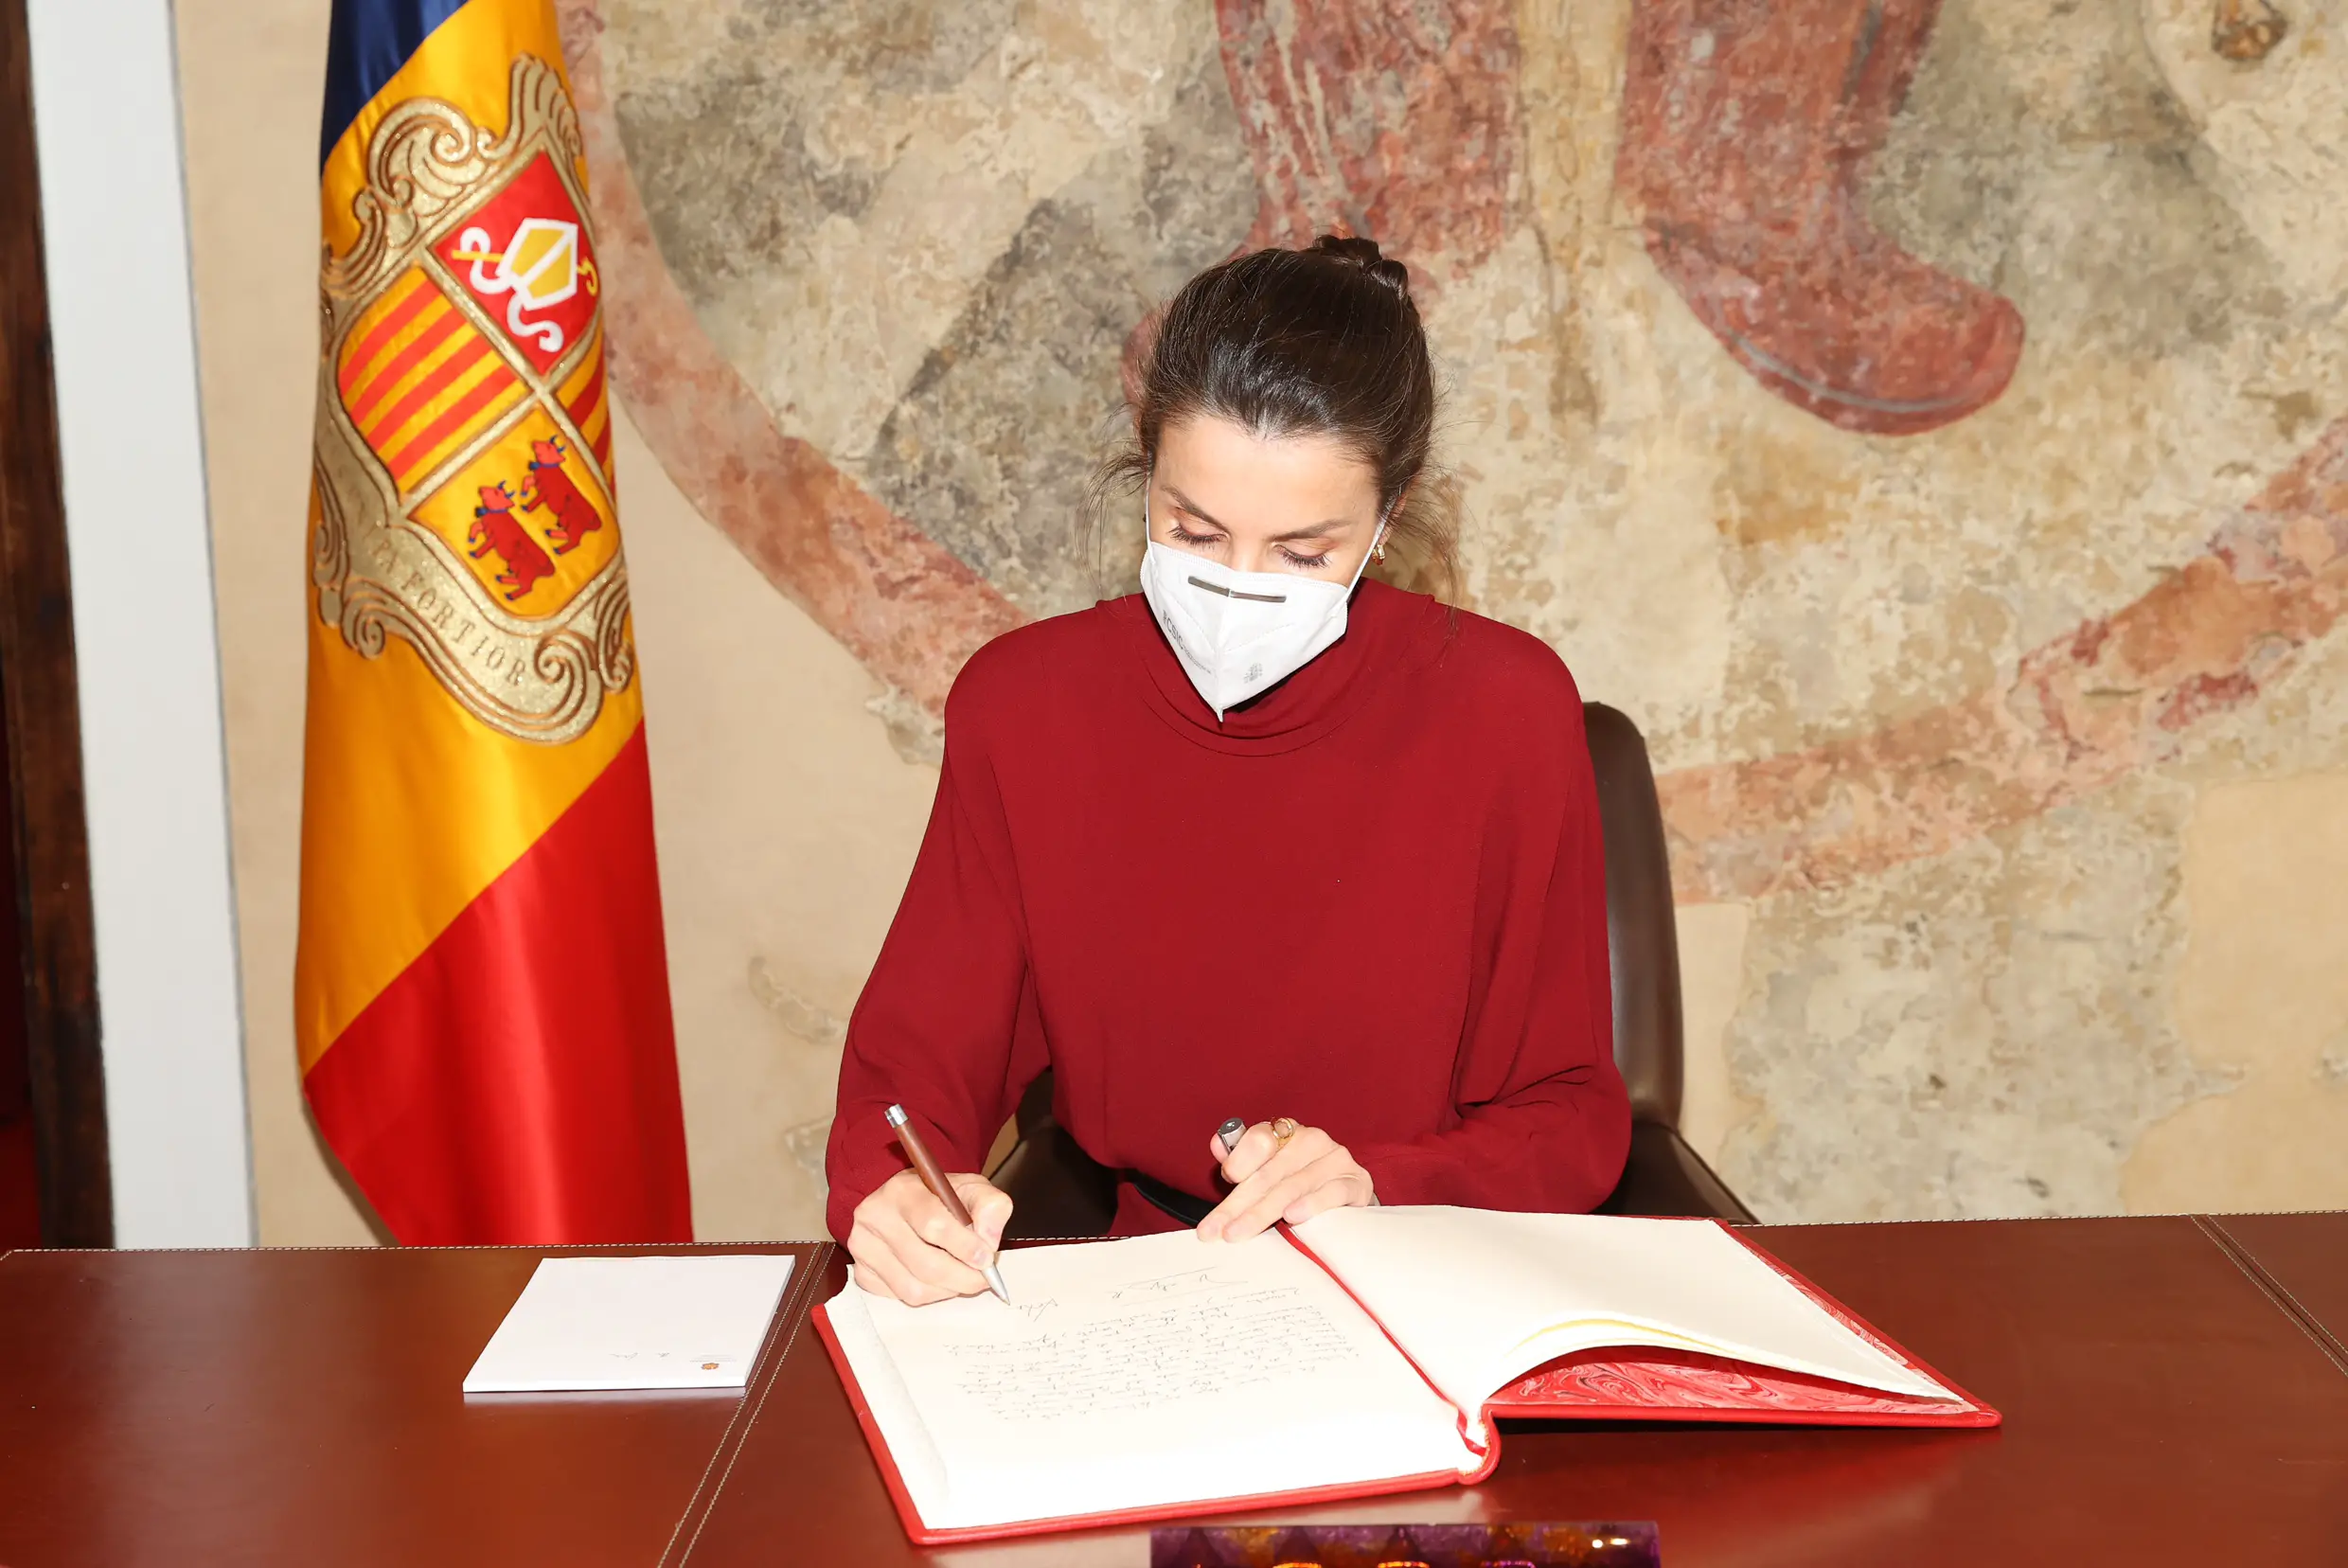 The Royal couple held a meeting with the General Ombudsman of Andorra and the parliamentary authorities of the Principality of Andorra and signed the Book of Honor